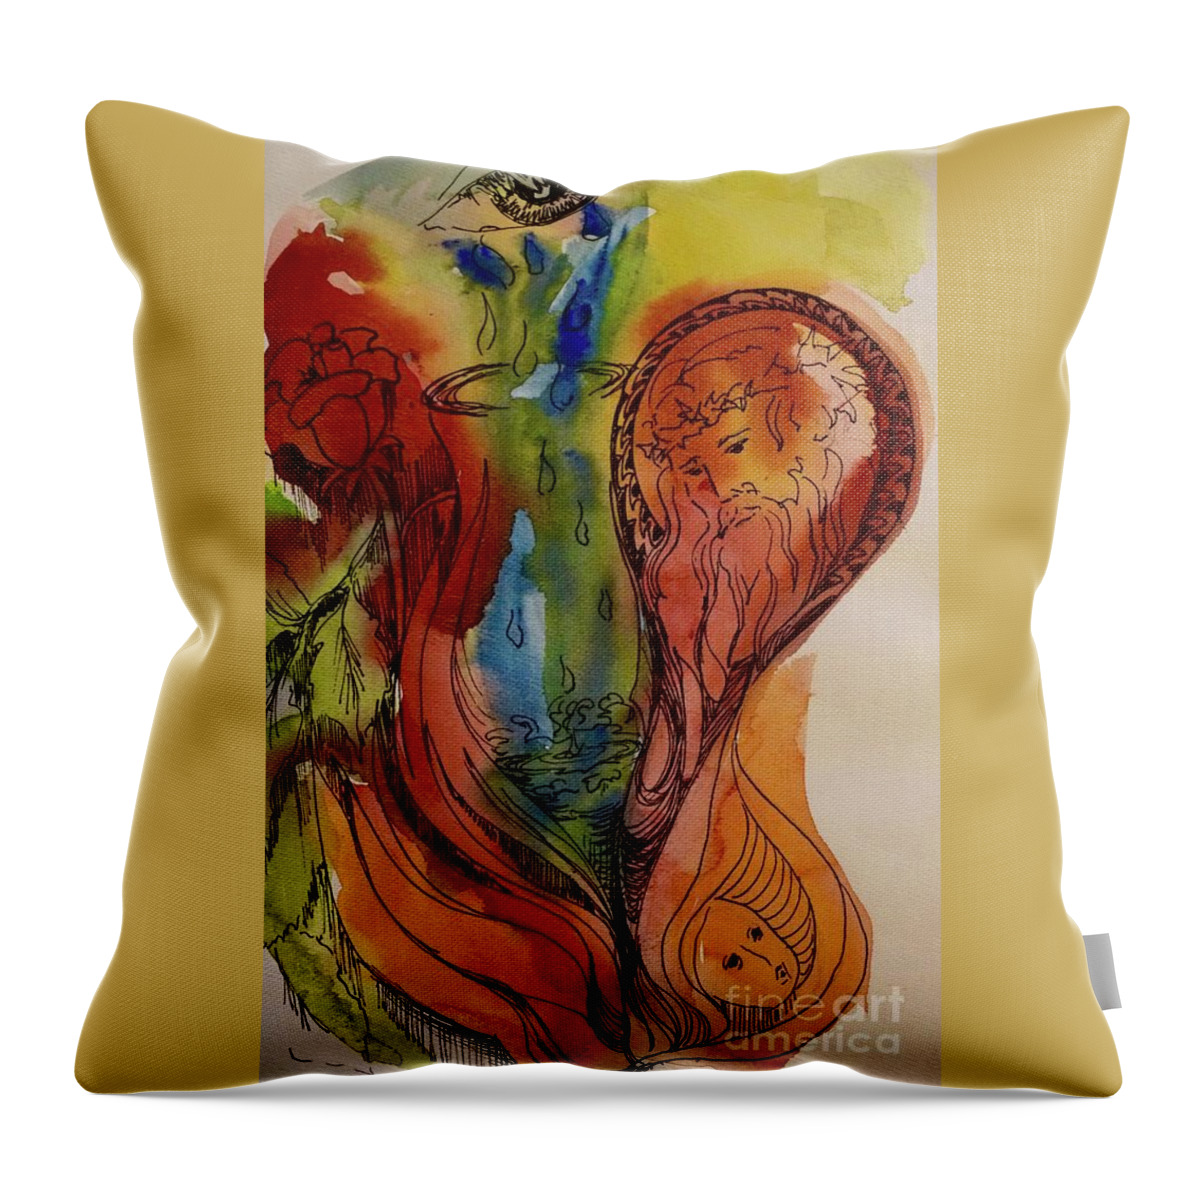 Worship Art Throw Pillow featuring the painting Bottled Tears by Genie Morgan